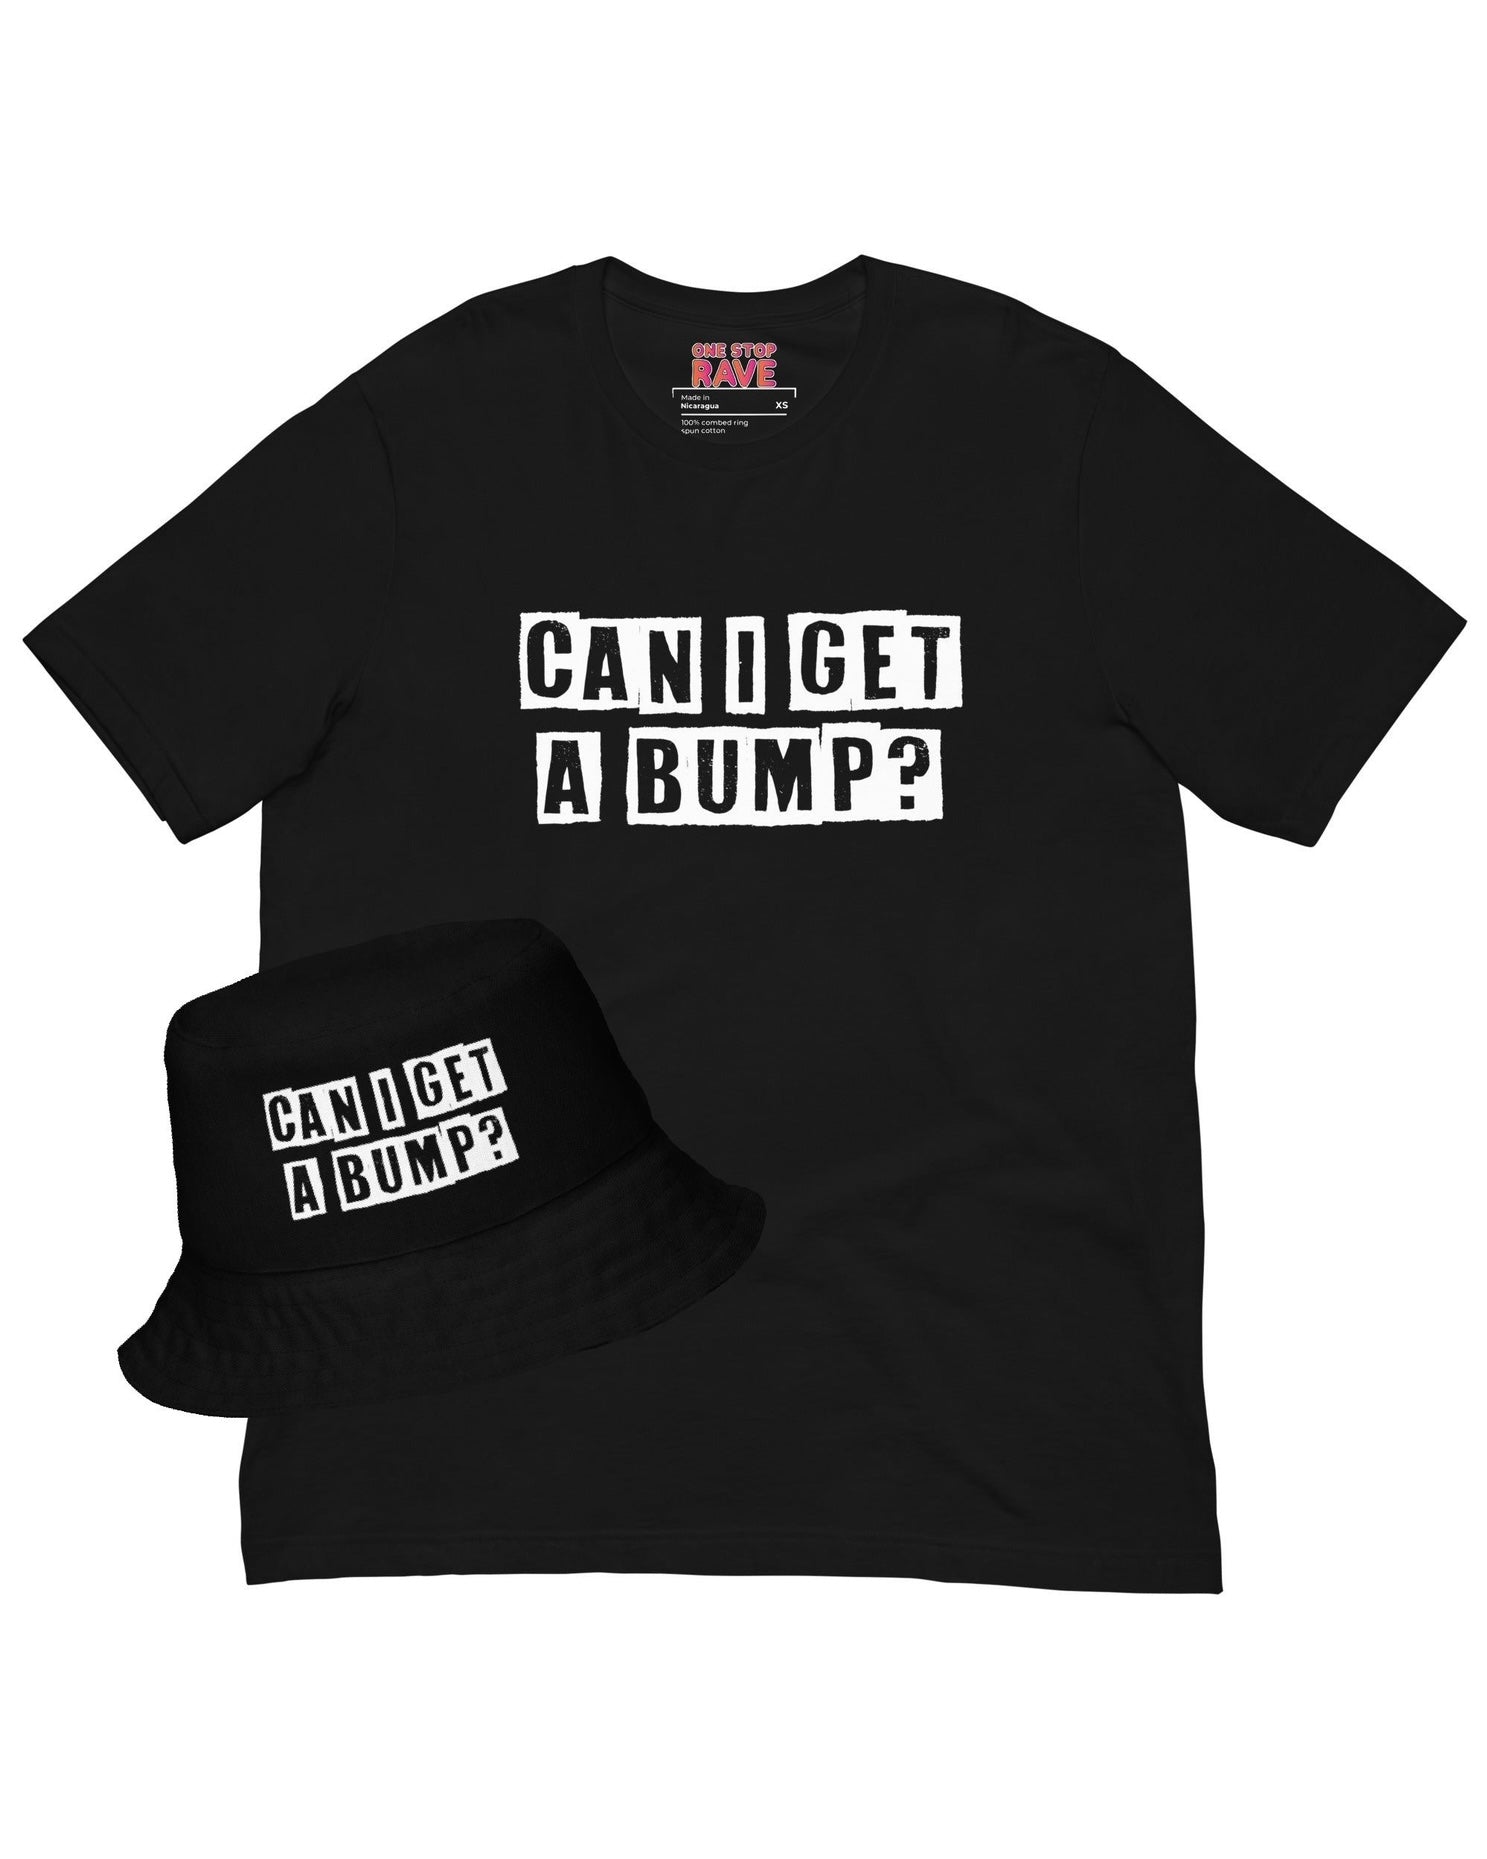 Black bucket hat & black t-shirt with the phrase "CAN I GET A BUMP?"